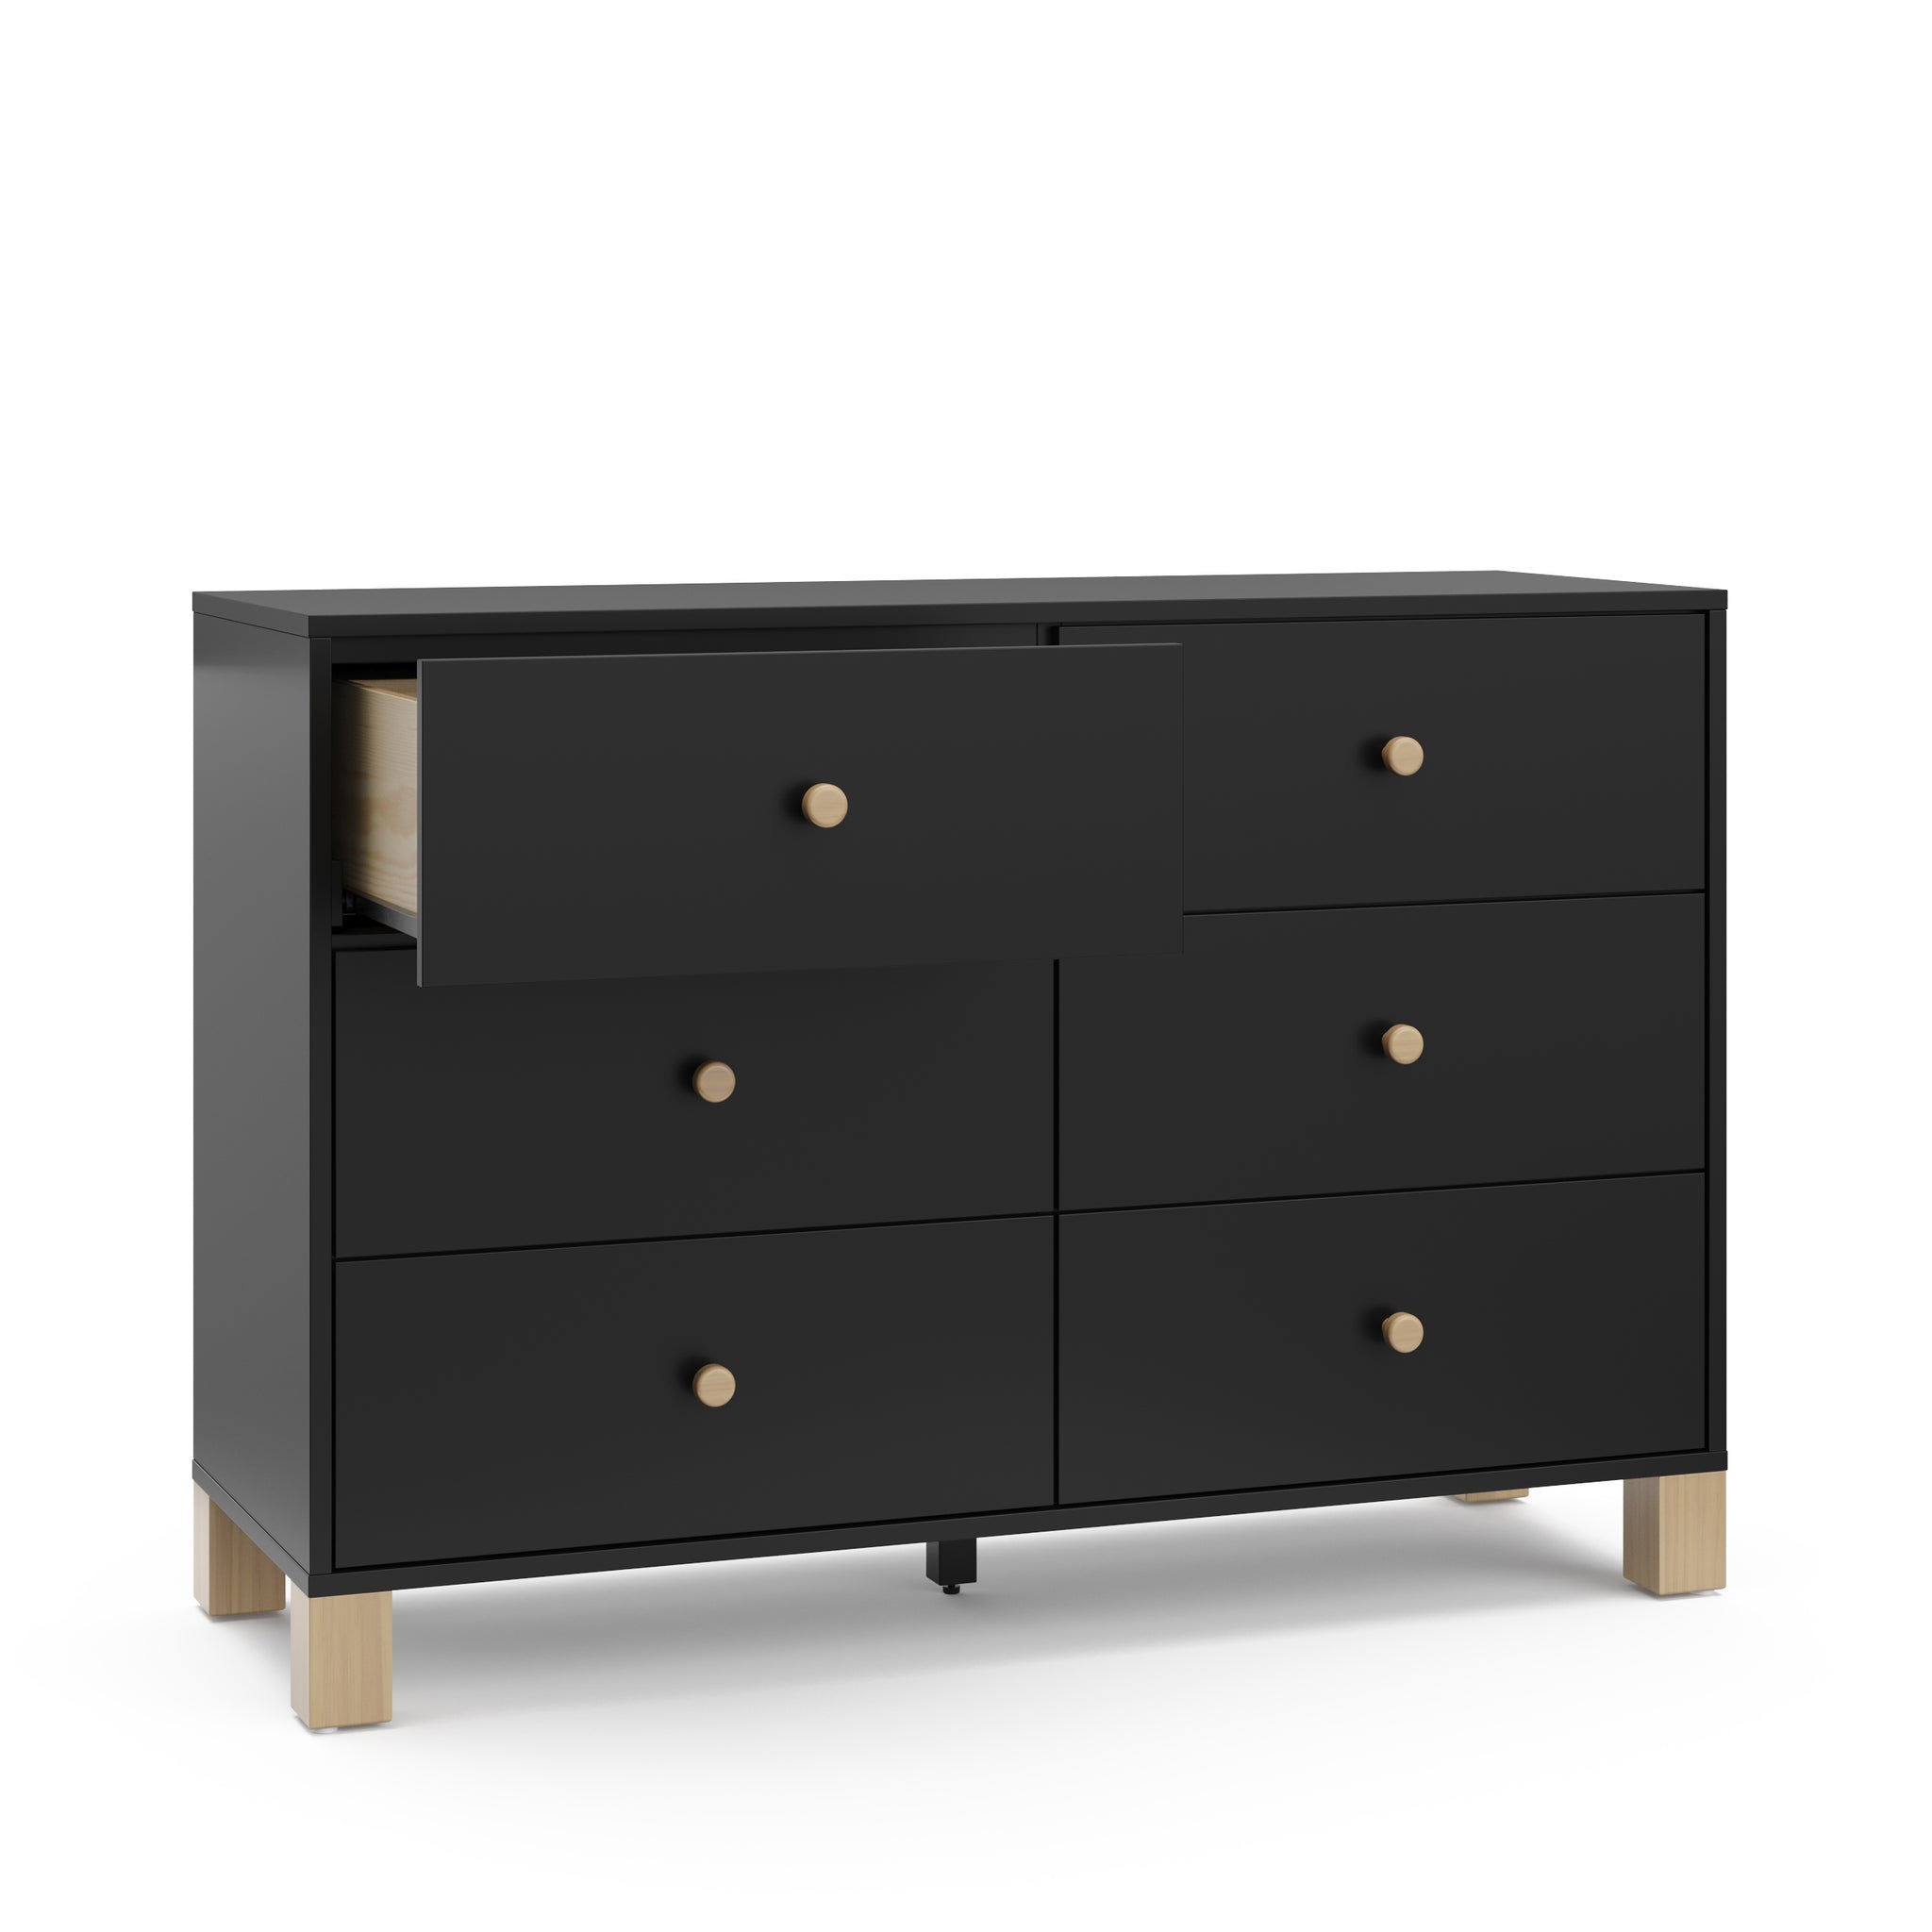 Angled view of black dresser with driftwood knobs and one open drawer